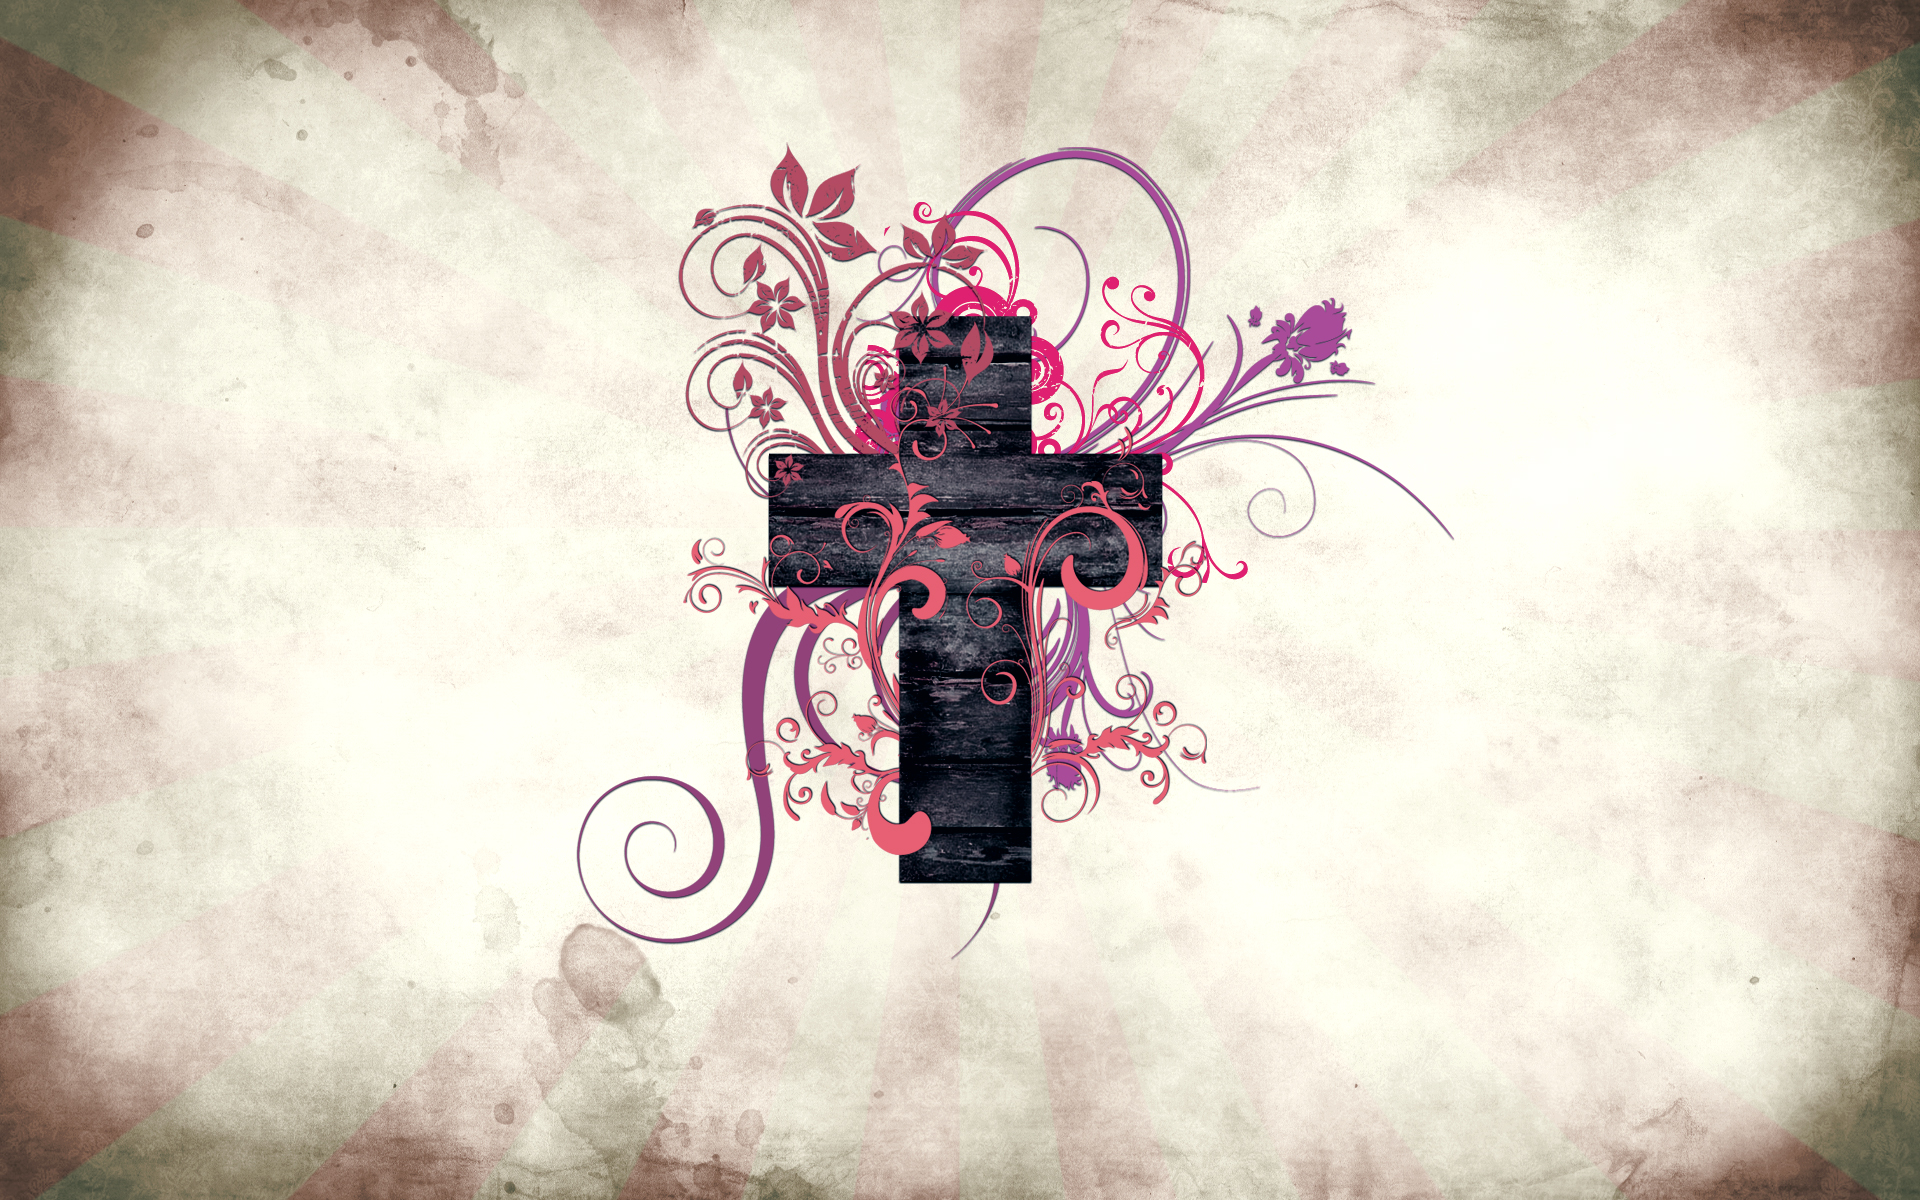 Jesus The Cross Wallpaper Download For Desktop Background Pictures Of Good  Friday Background Image And Wallpaper for Free Download